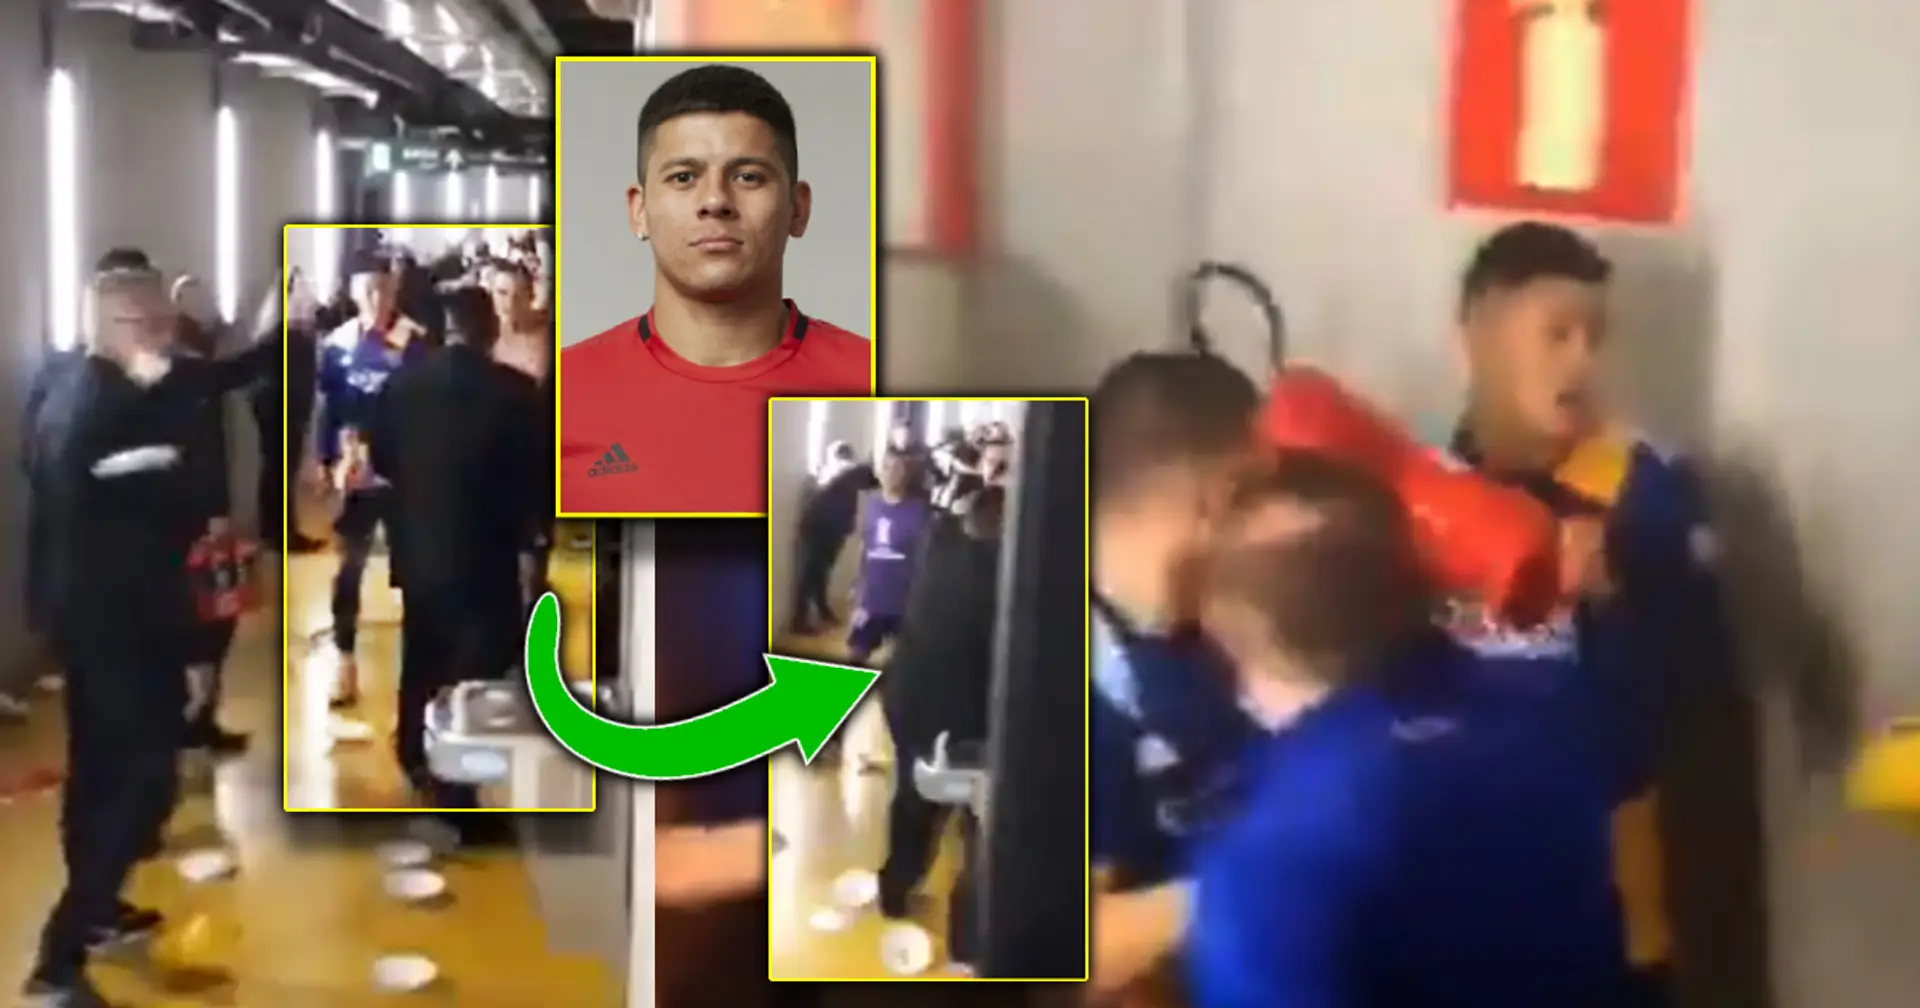 Marcos Rojo punches guard in massive brawl, grabs fire extinguisher after Copa Libertadores game